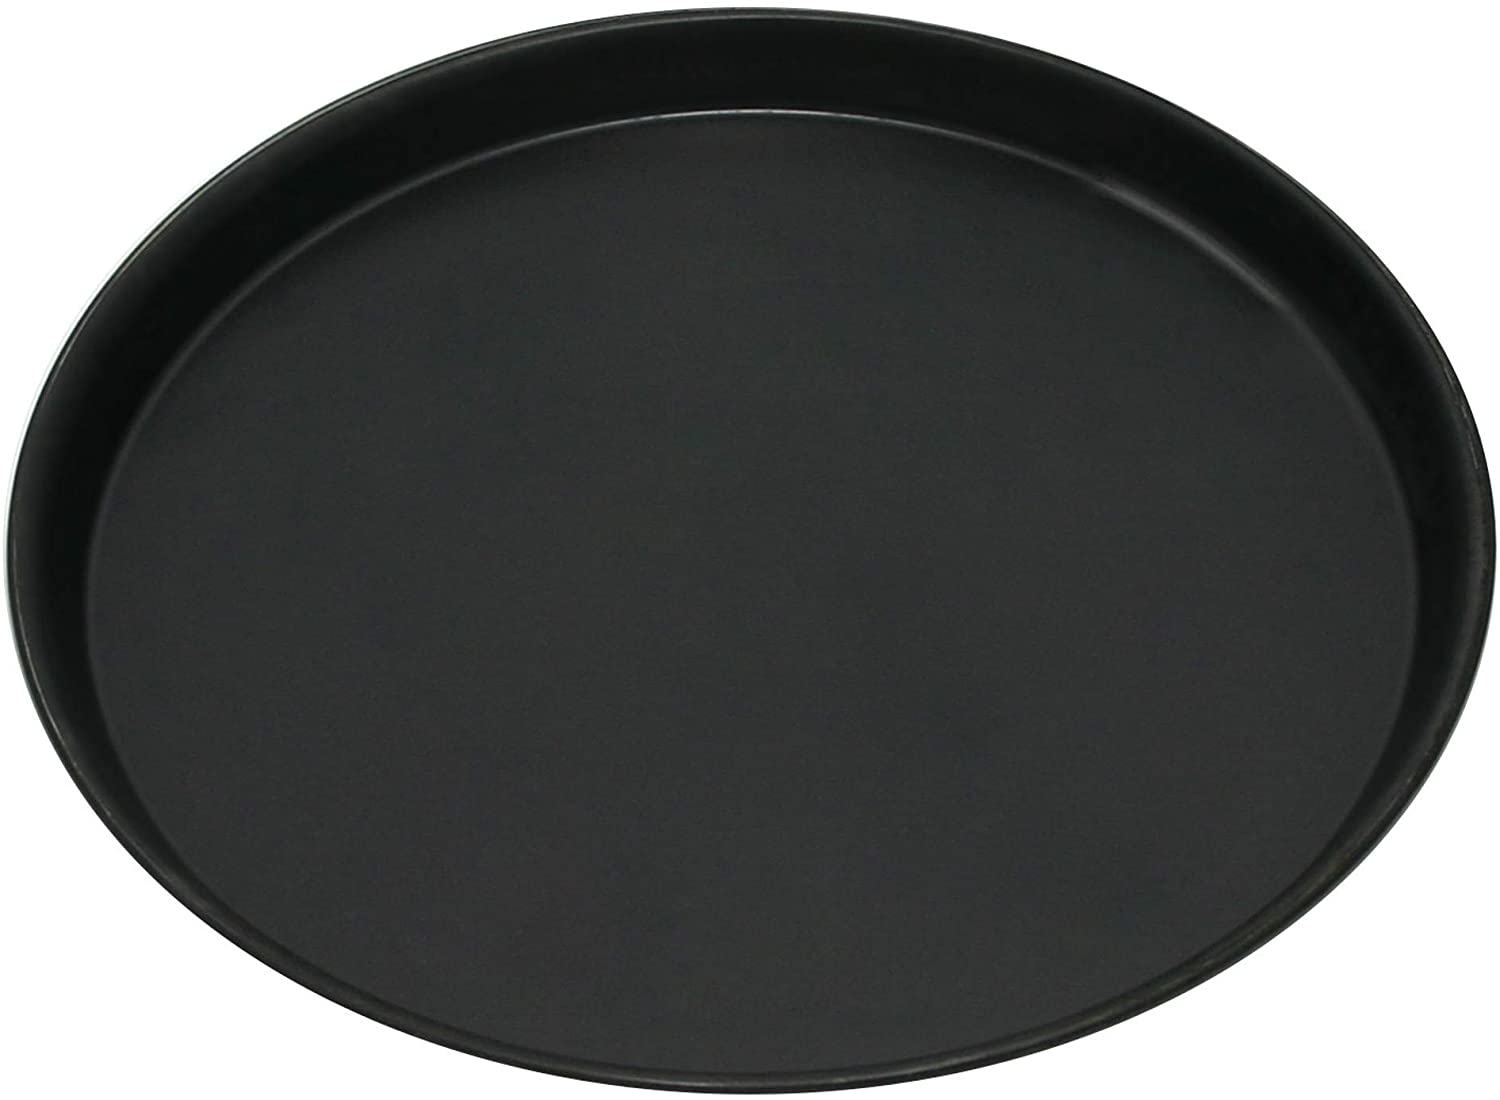 Gräwe Pizza Tray Round 30 Cm Stable Professional Quality